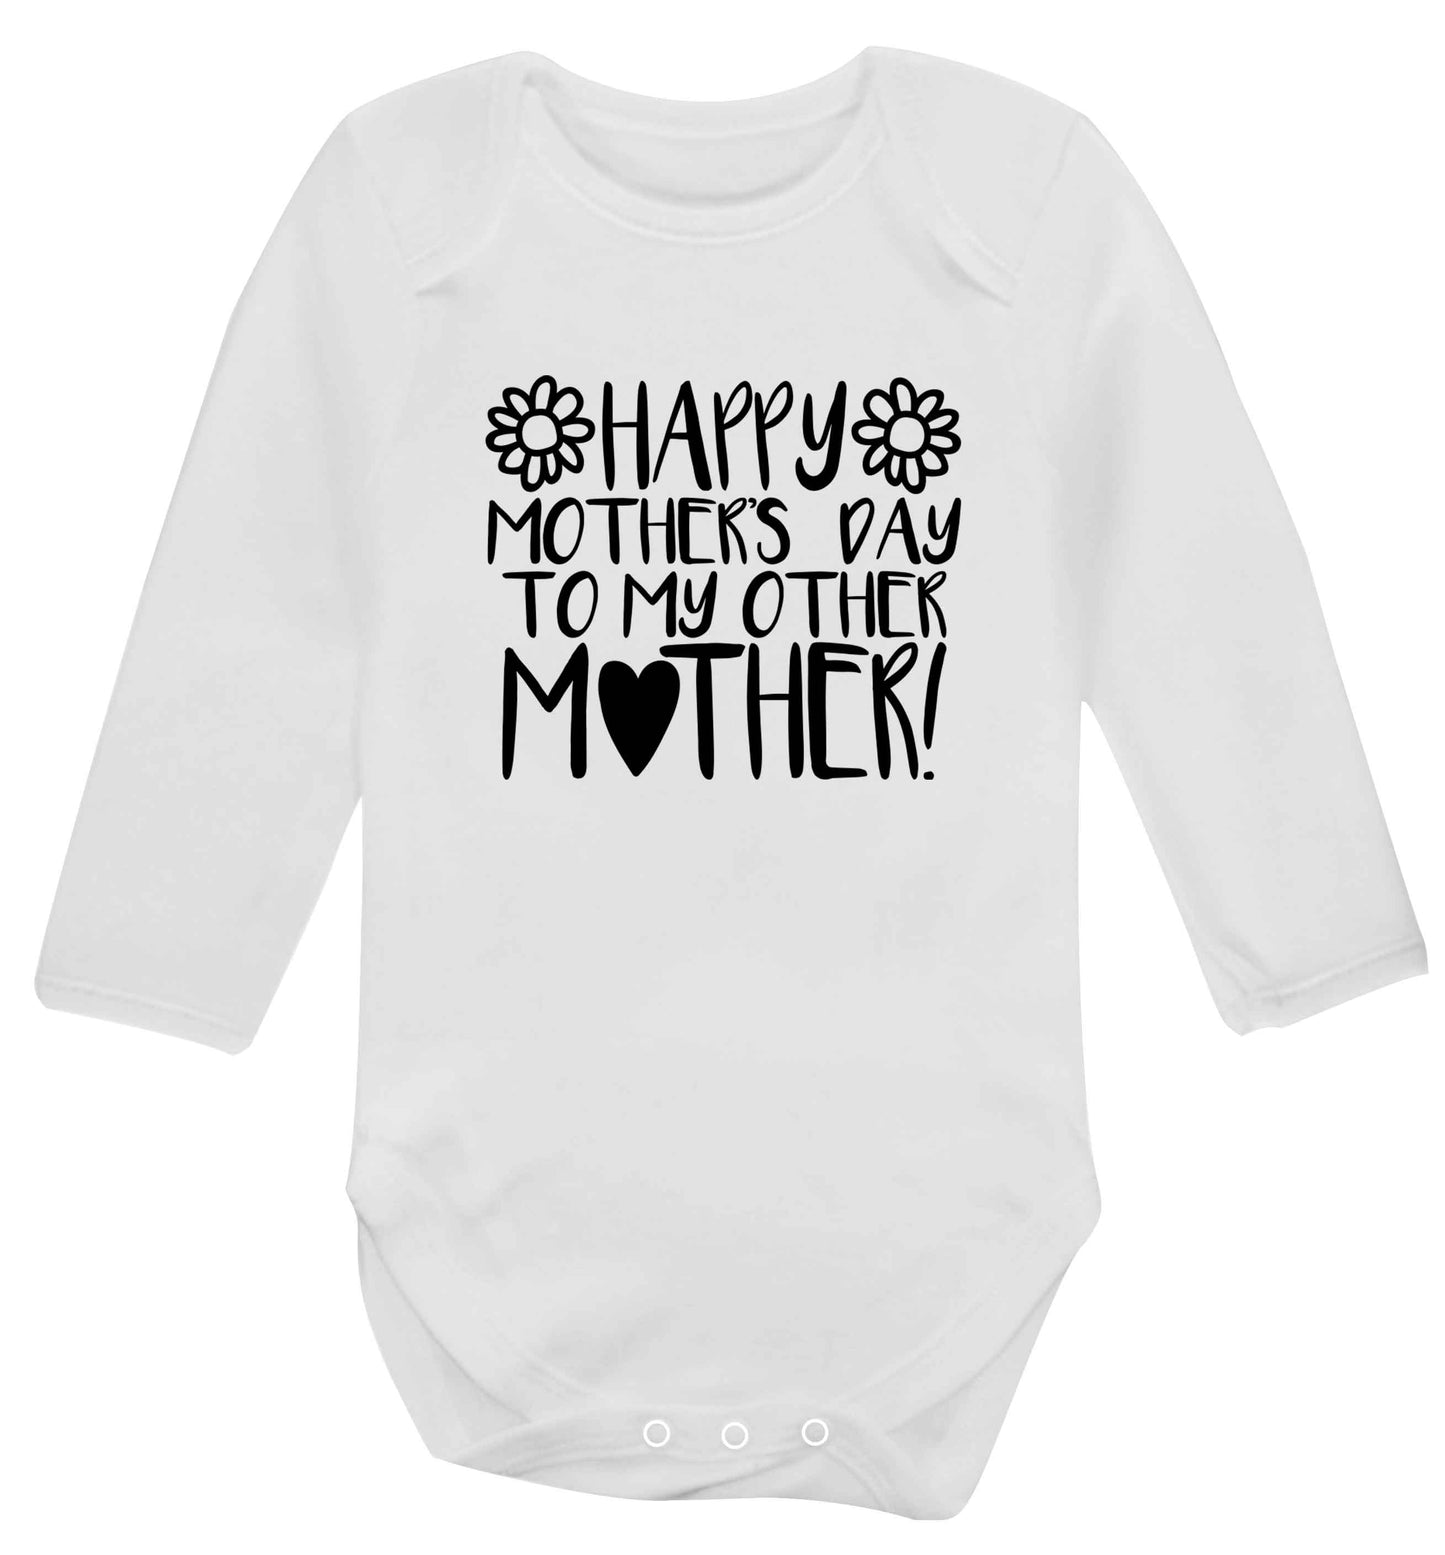 Happy mother's day to my other mother baby vest long sleeved white 6-12 months